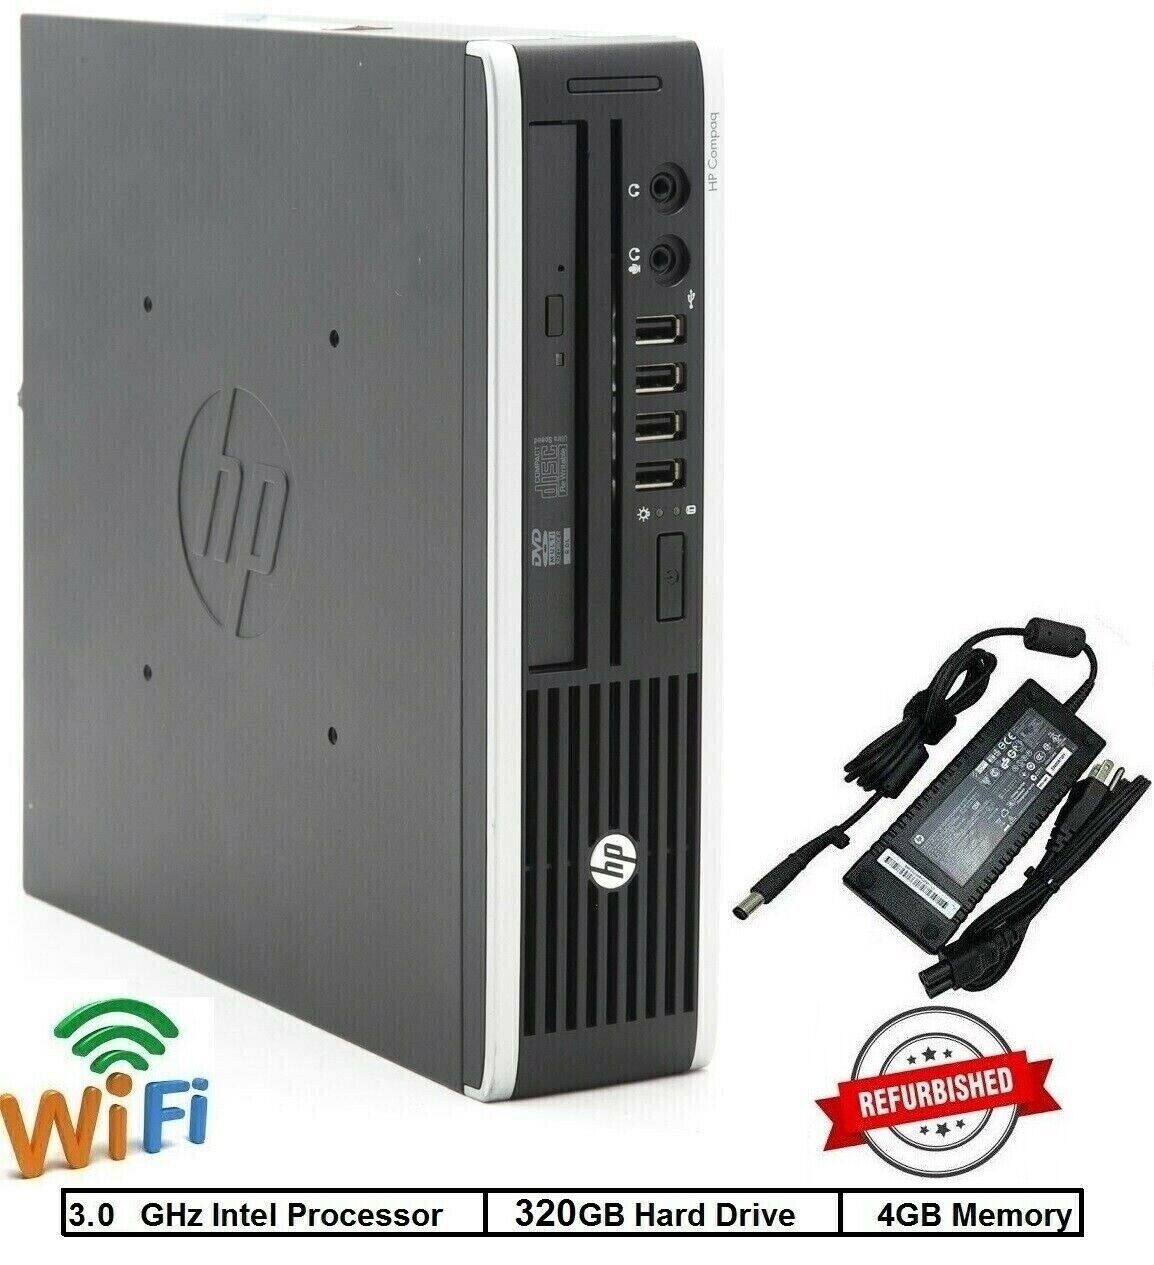 Primary image for HP Slim Desktop Computer Windows 10 Pro 4GB RAM 320GB HDD WiFi DVD for Office...